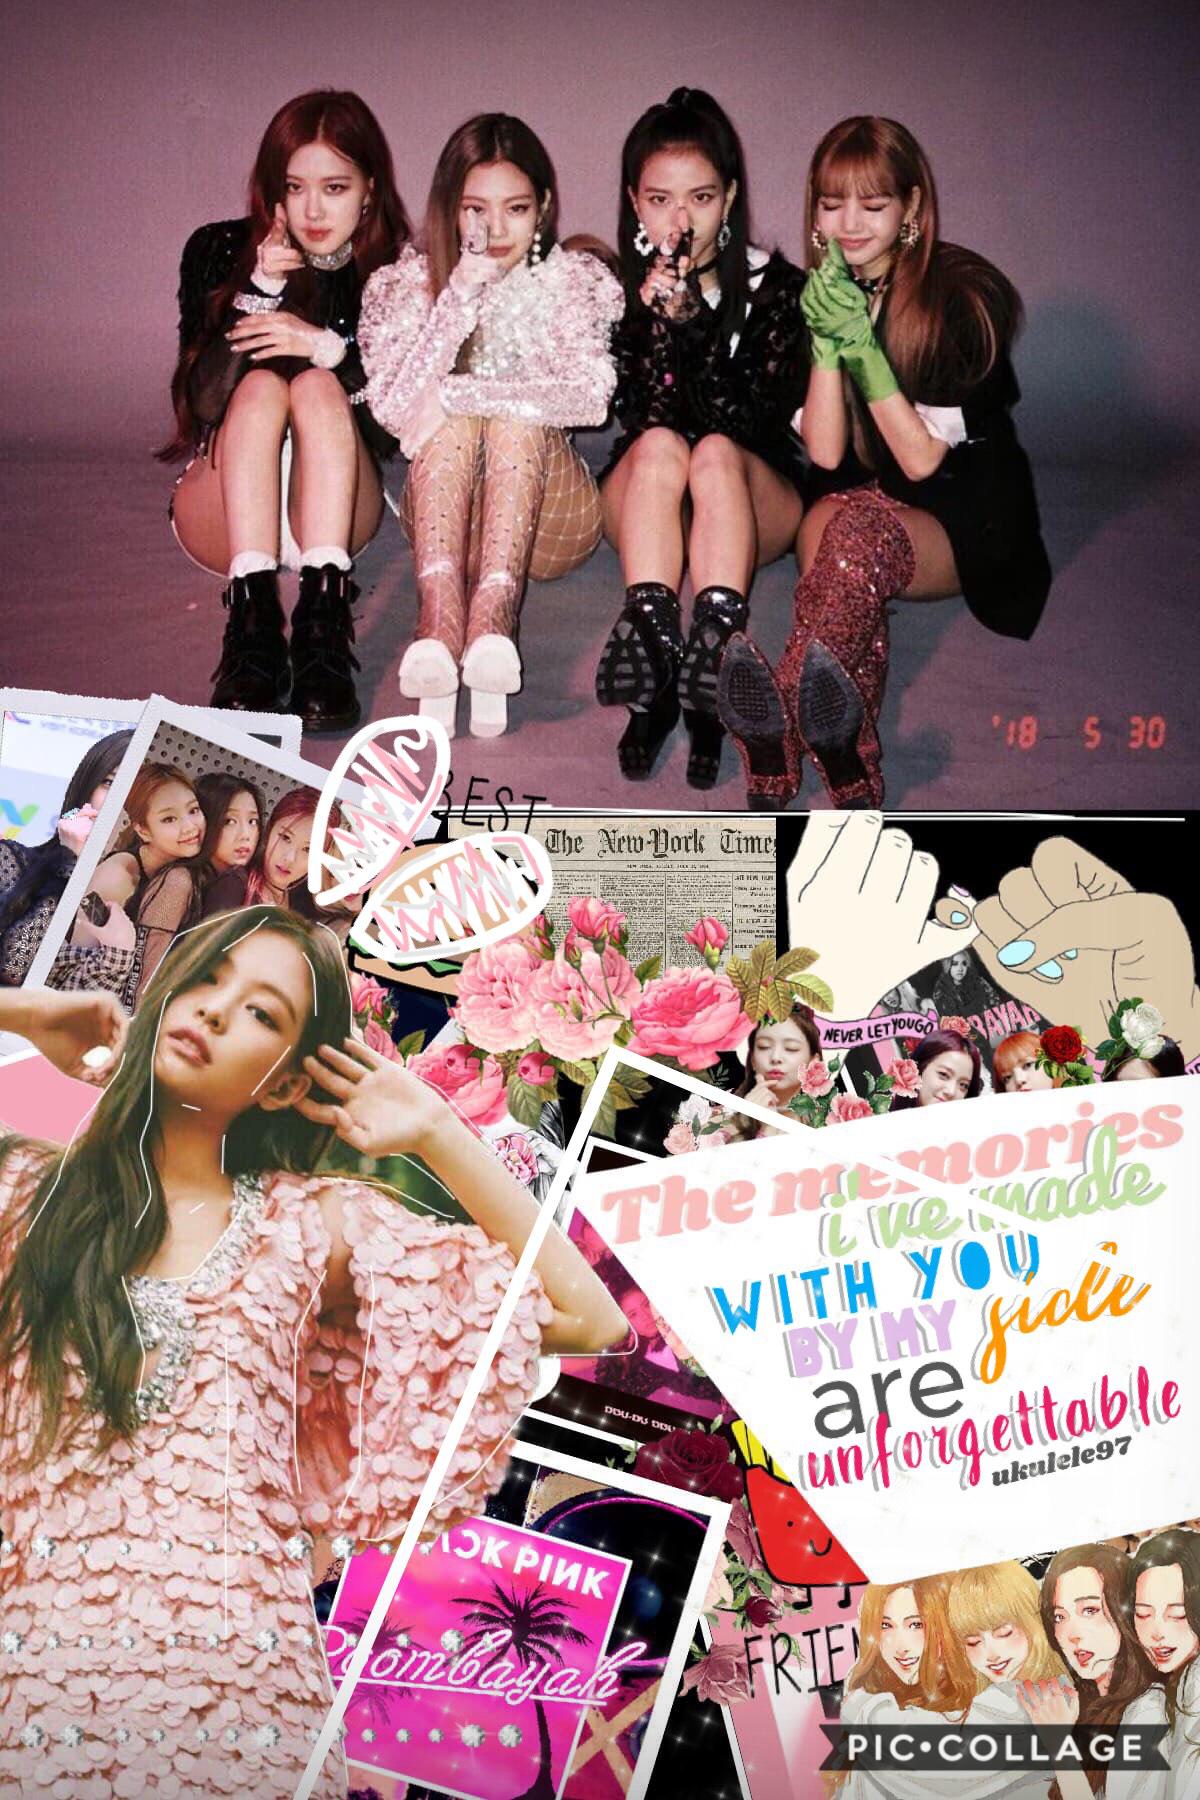 Tappy♥️💥🎉

A Blackpink collage! It’s for contest! I just started listening to KPop and am hooked! I purple Blackpink ♥️ over all KPop groups! QOTD What’s your fave music artist? AOTD: honestly it’s too hard to pick for me 😂 Happy New Years Eve! 🎉